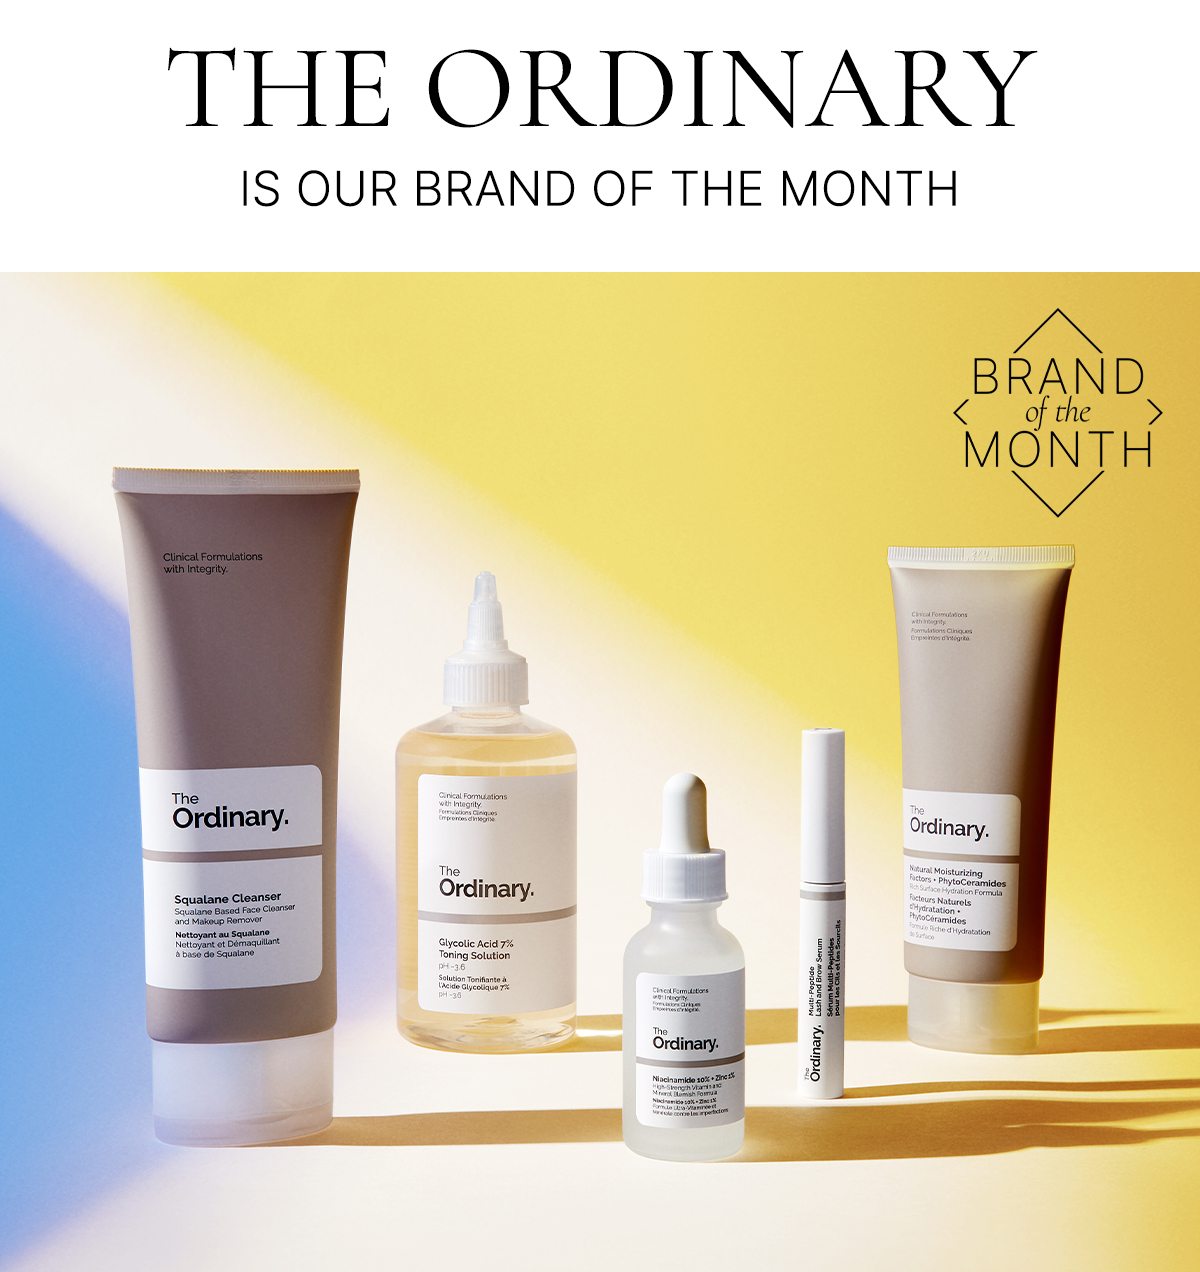 THE ORDINARY IS OUR BRAND OF THE MONTH